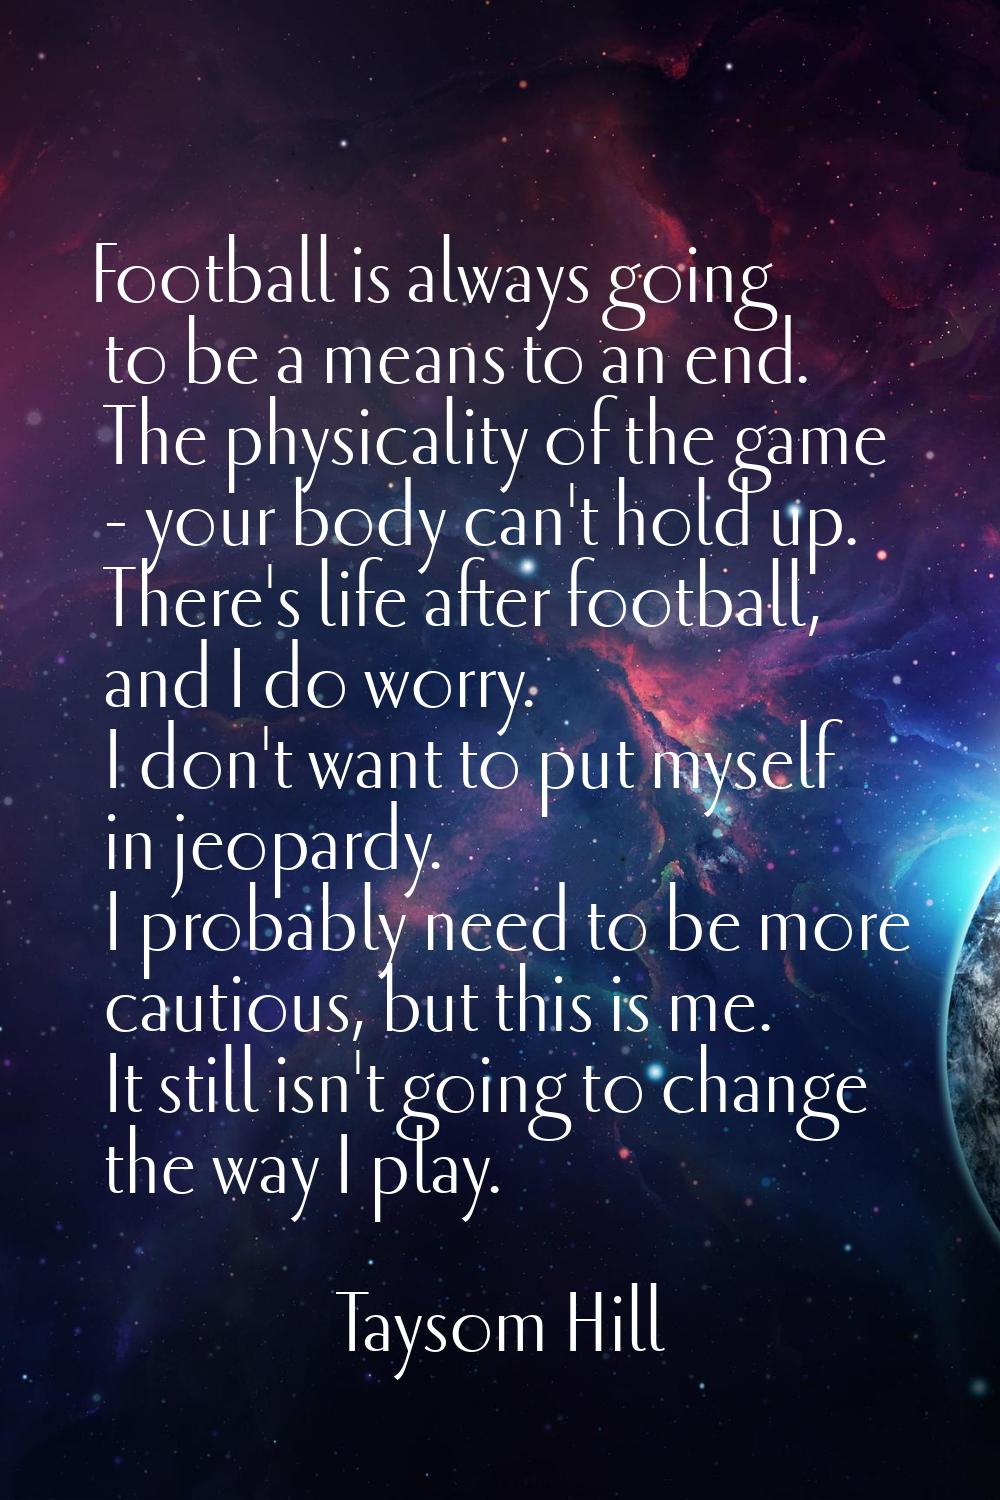 Football is always going to be a means to an end. The physicality of the game - your body can't hol